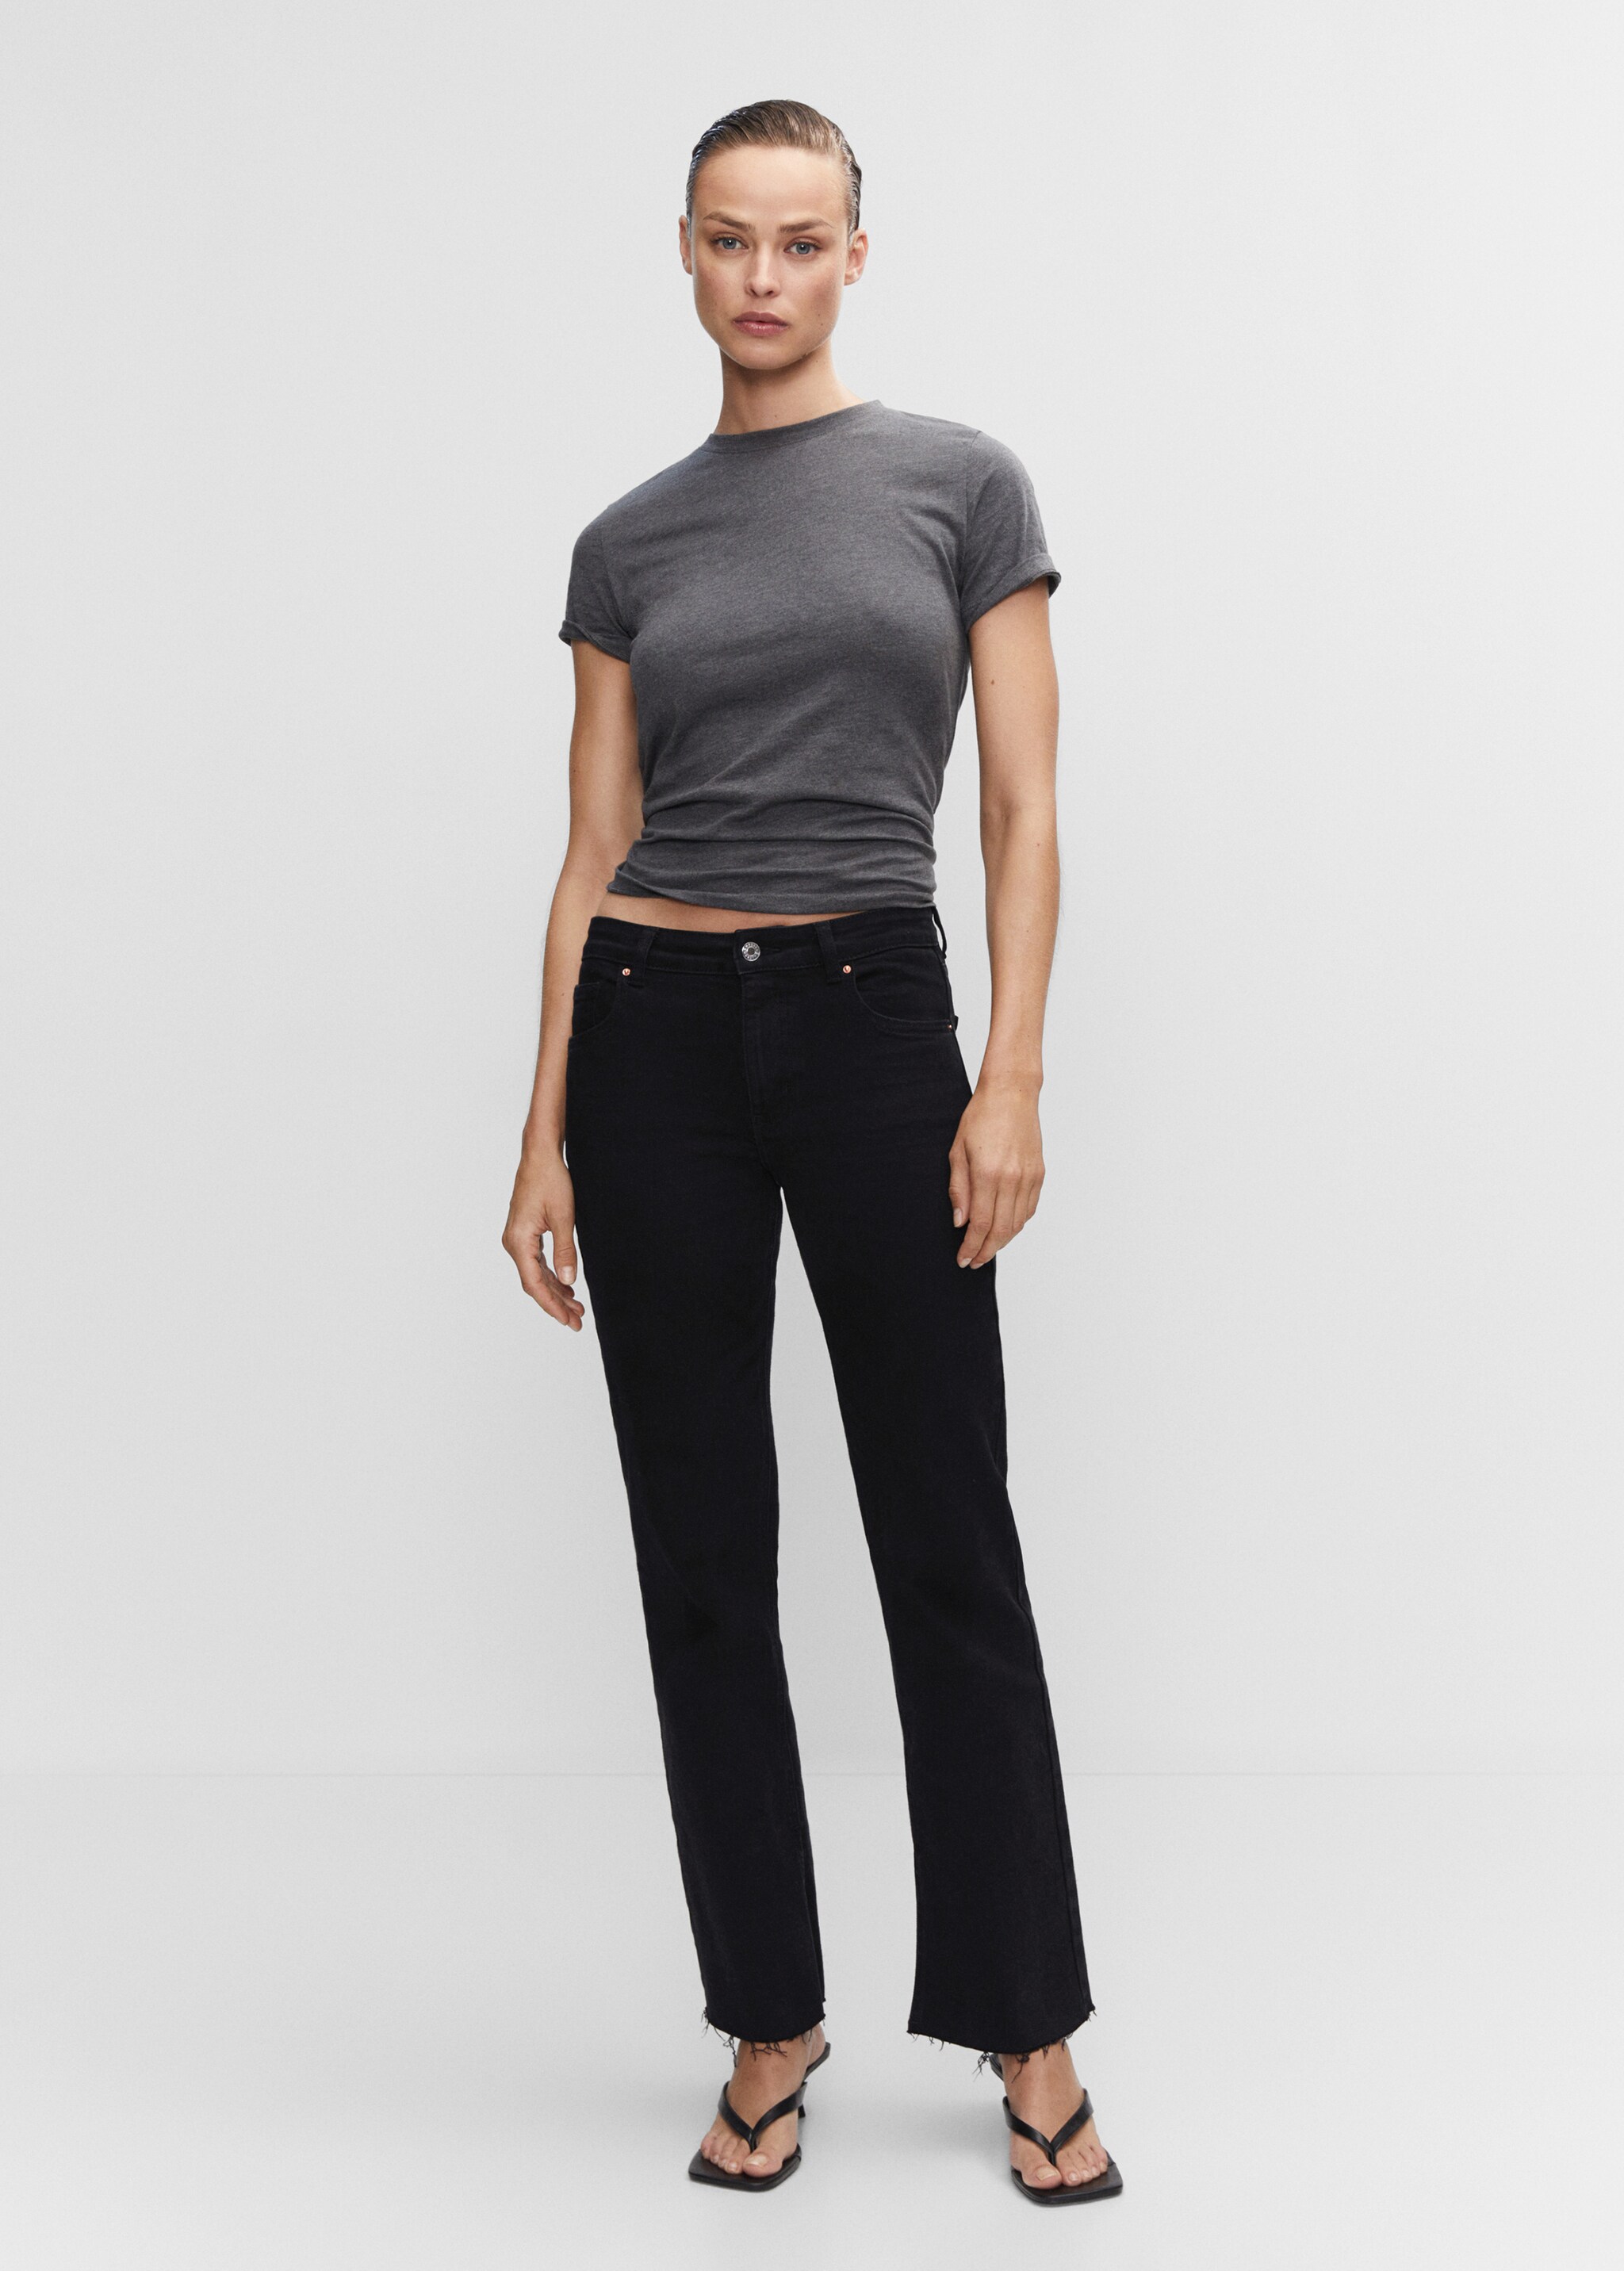 Medium-rise straight jeans with slits - General plane